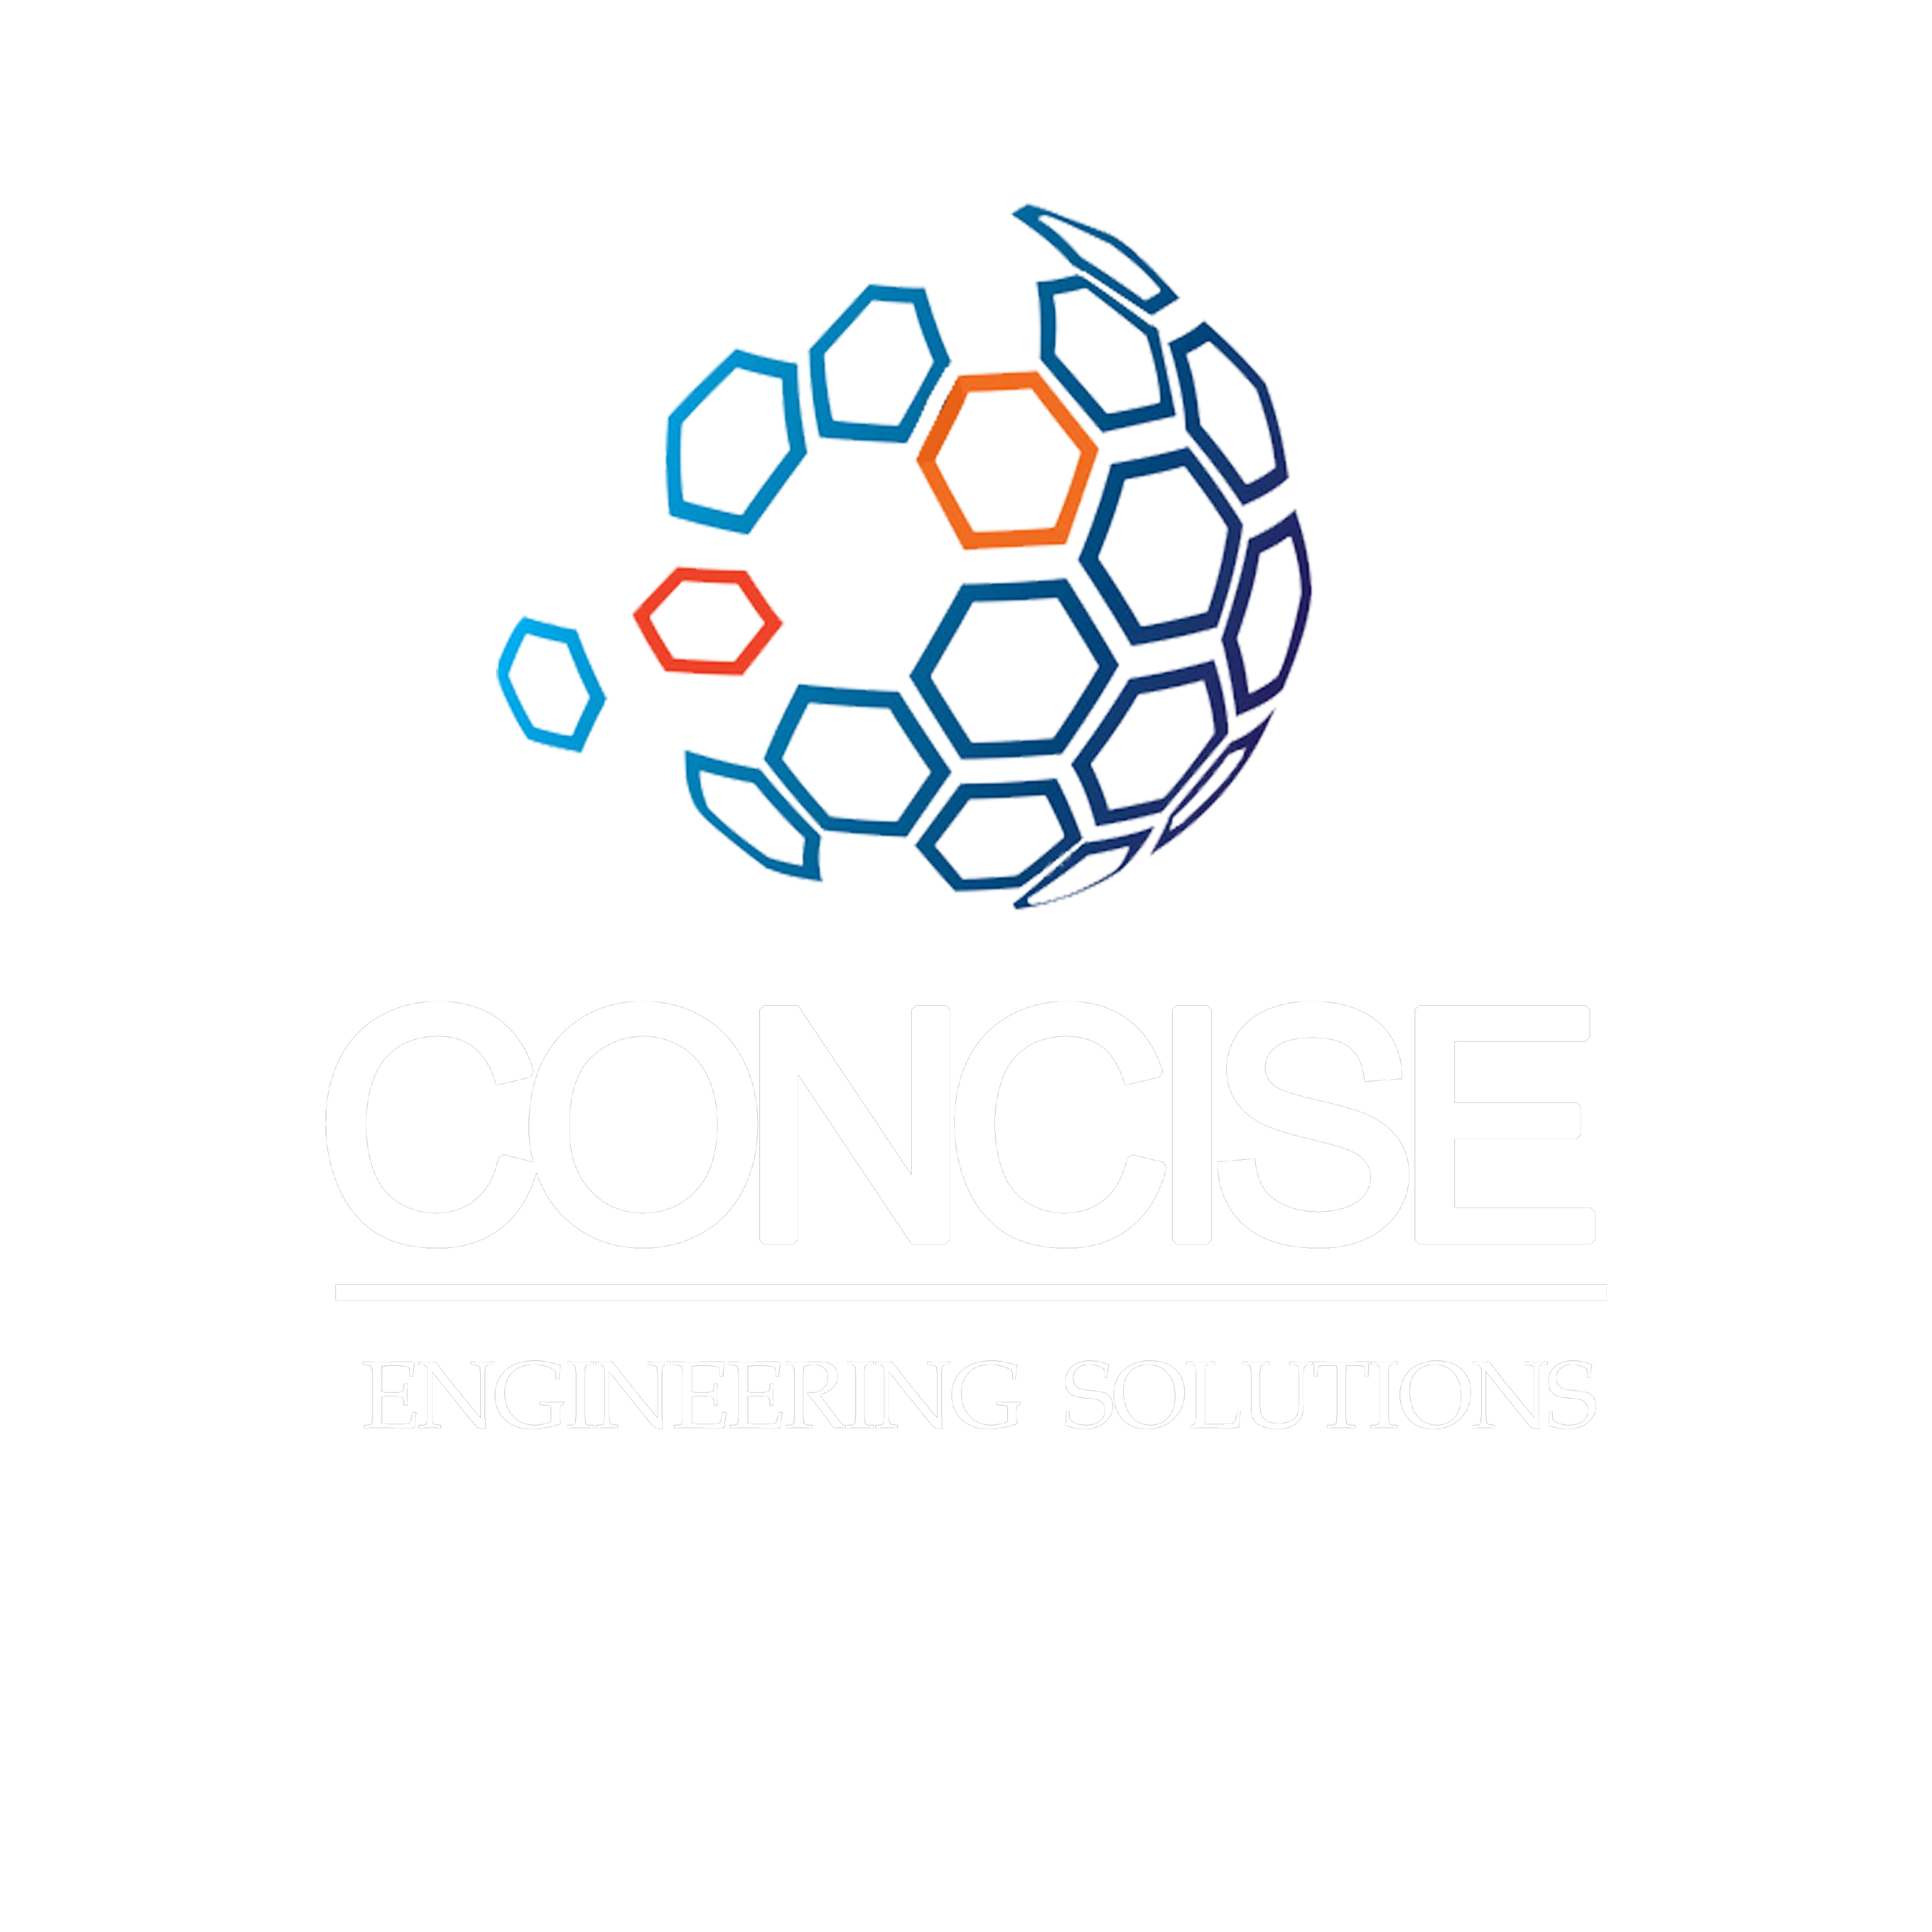 CONCISE ENGINEERING SOLUTIONS